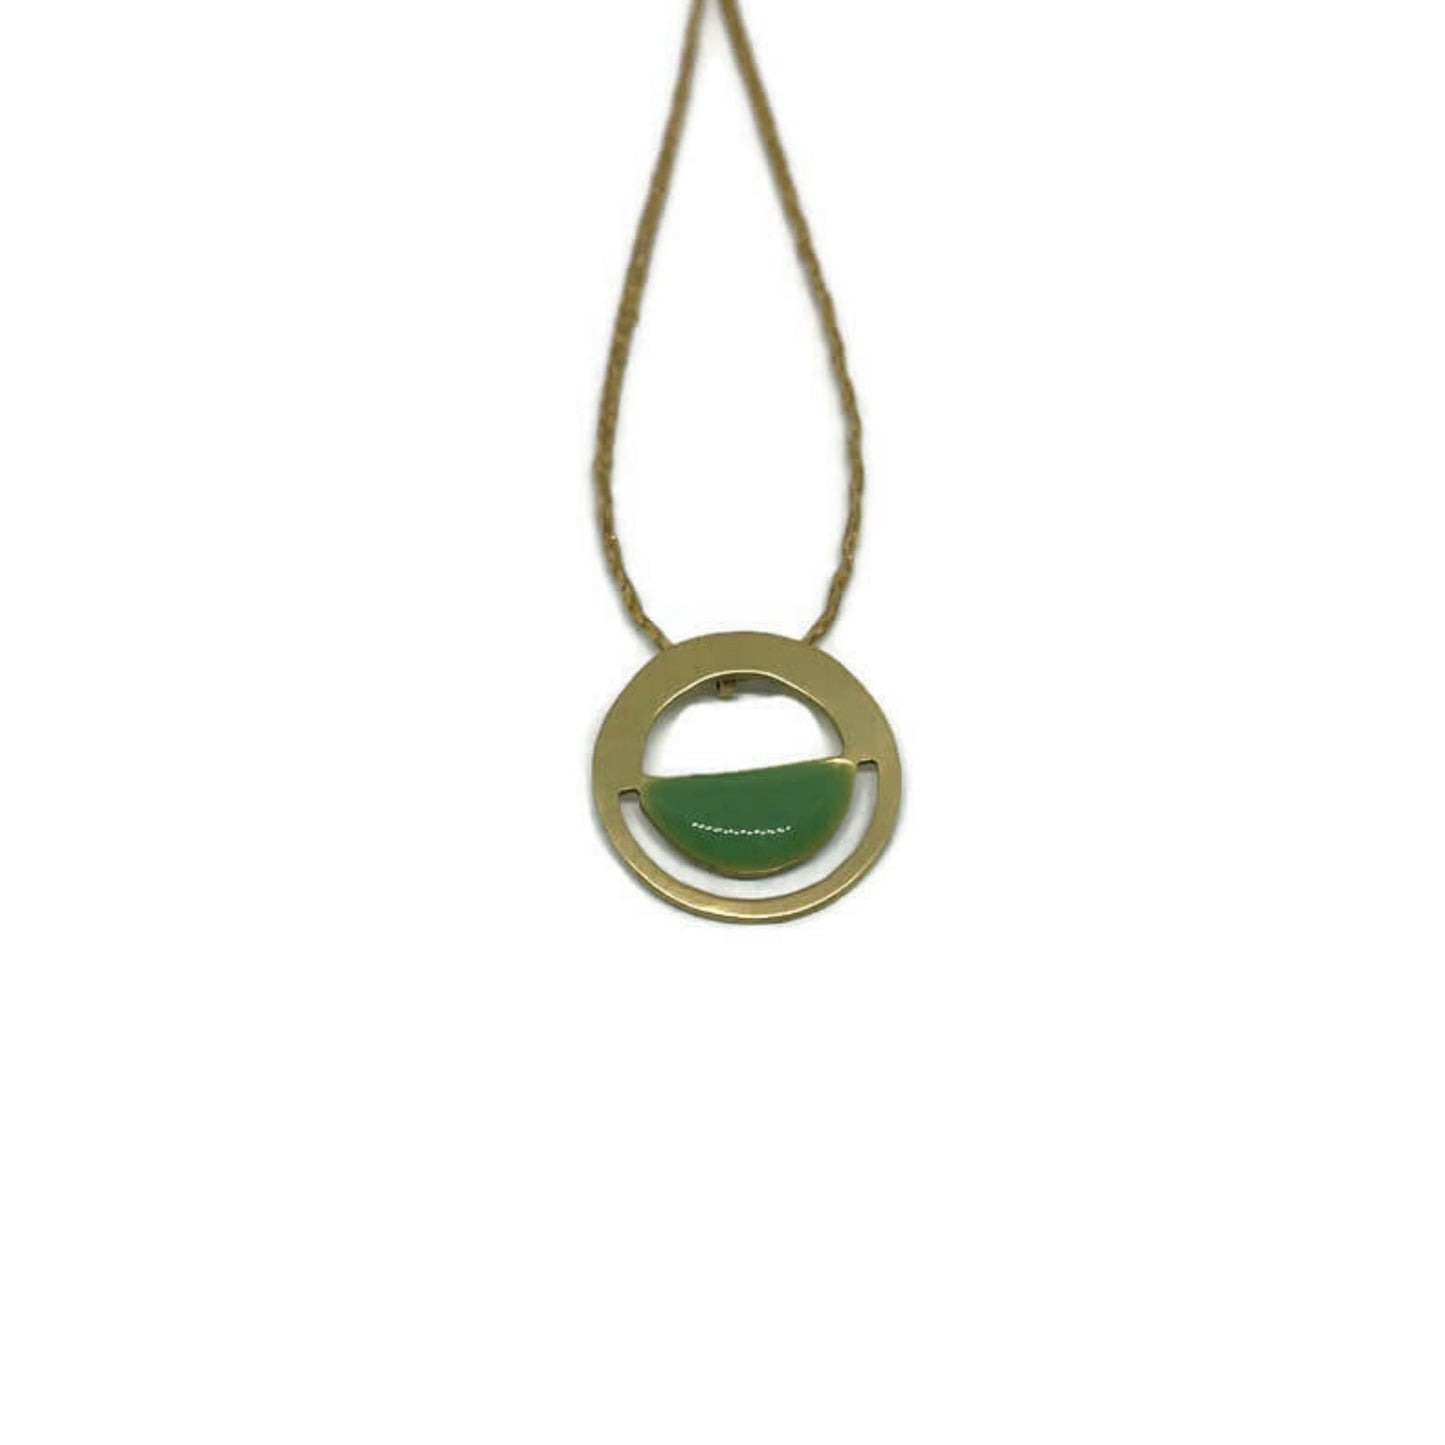 Brass necklace with resin | Allure Necklace - CURIUDO